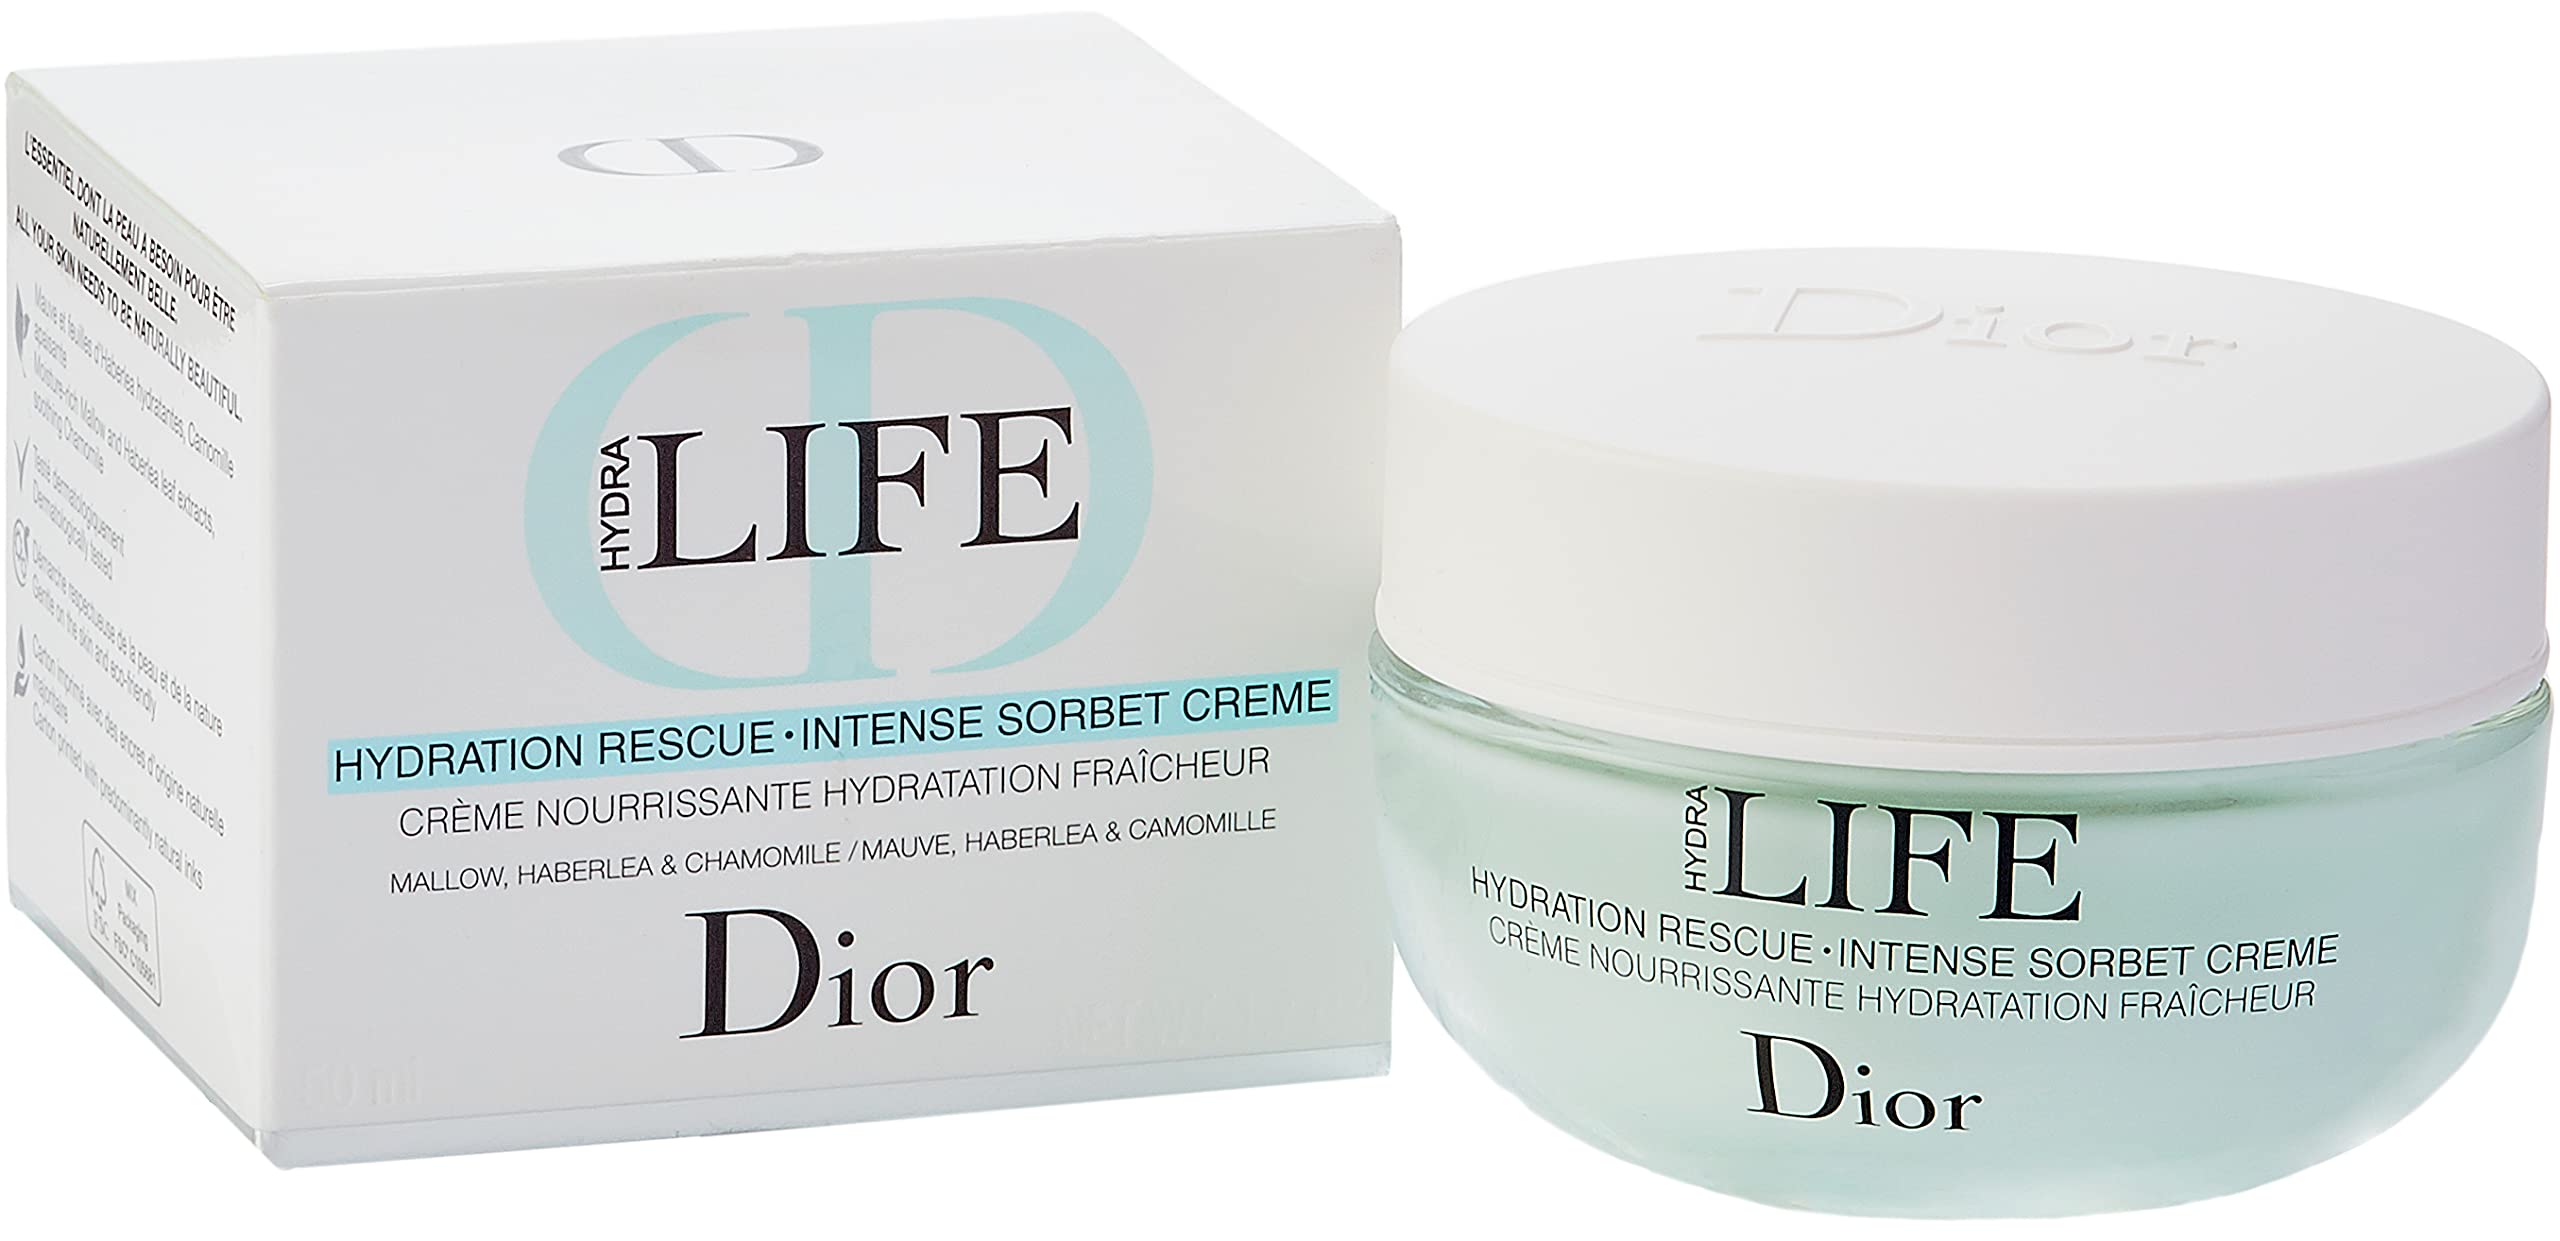 Dior Hydra Life Skincare Collection Review  The Happy Sloths Beauty  Makeup and Skincare Blog with Reviews and Swatches